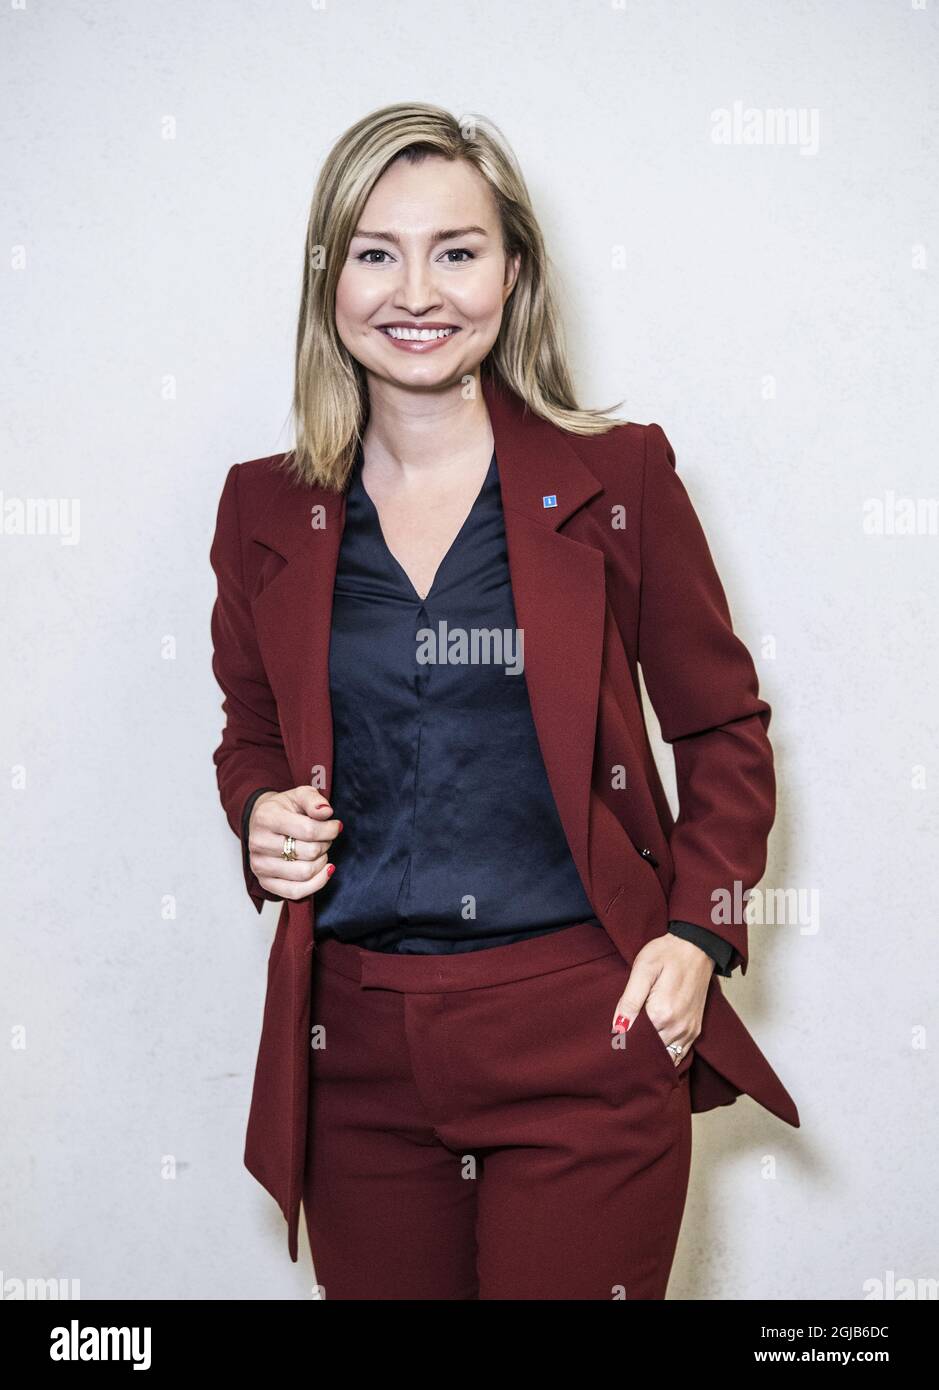 2018-01-18 Ebba Busch Thor, Chairman of the Kristdemokraterna, Sweden's  Christian Democratic party Foto: Tomas Oneborg / code 30142 Stock Photo -  Alamy